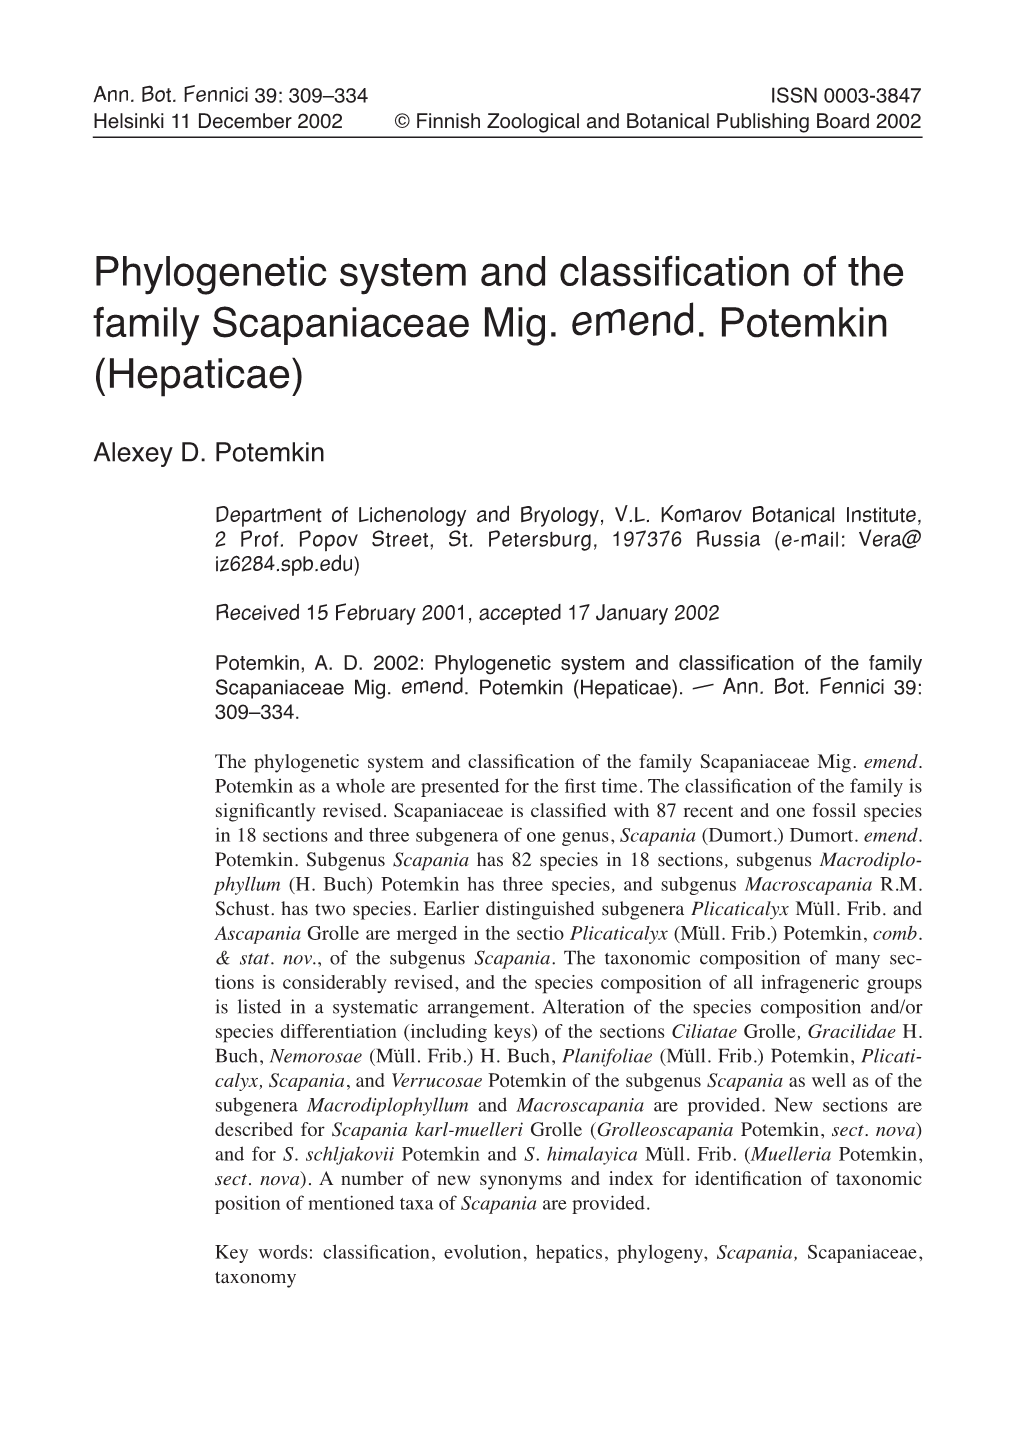 Phylogenetic System and Classification of the Family Scapaniaceae